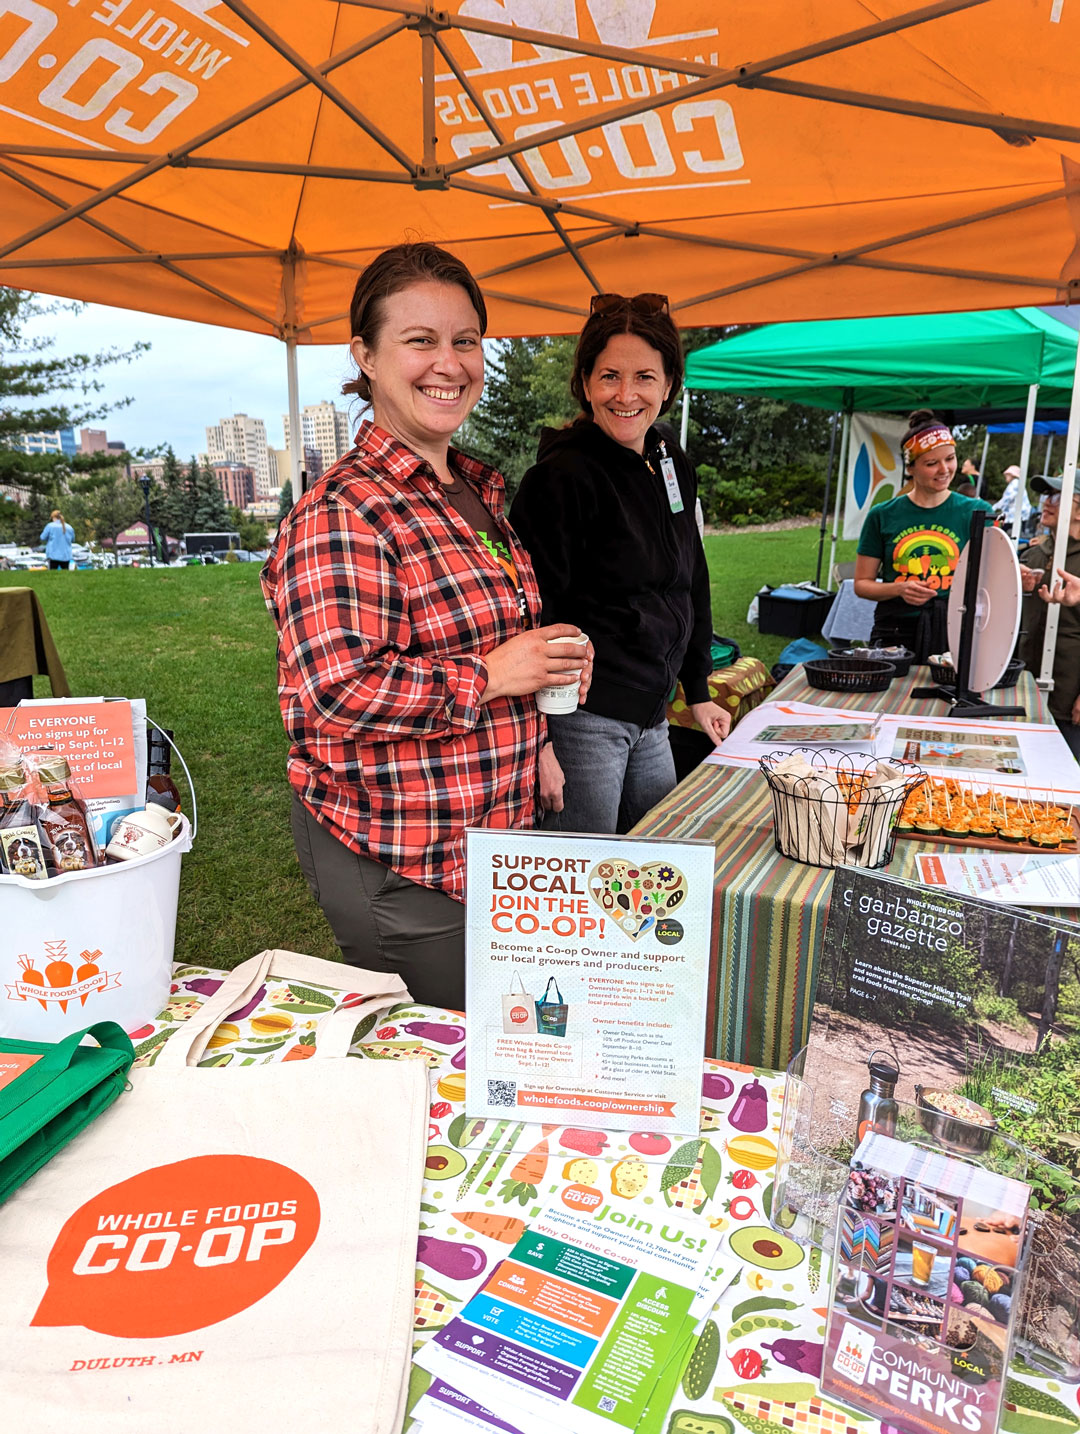 Two people stand behind a table at an outdoor event booth for Whole Foods Coop Duluth MN. The table displays brochures and promotional materials. They smile at the camera, with one person in a red plaid shirt and another in a black jacket. A tent and trees are in the background.